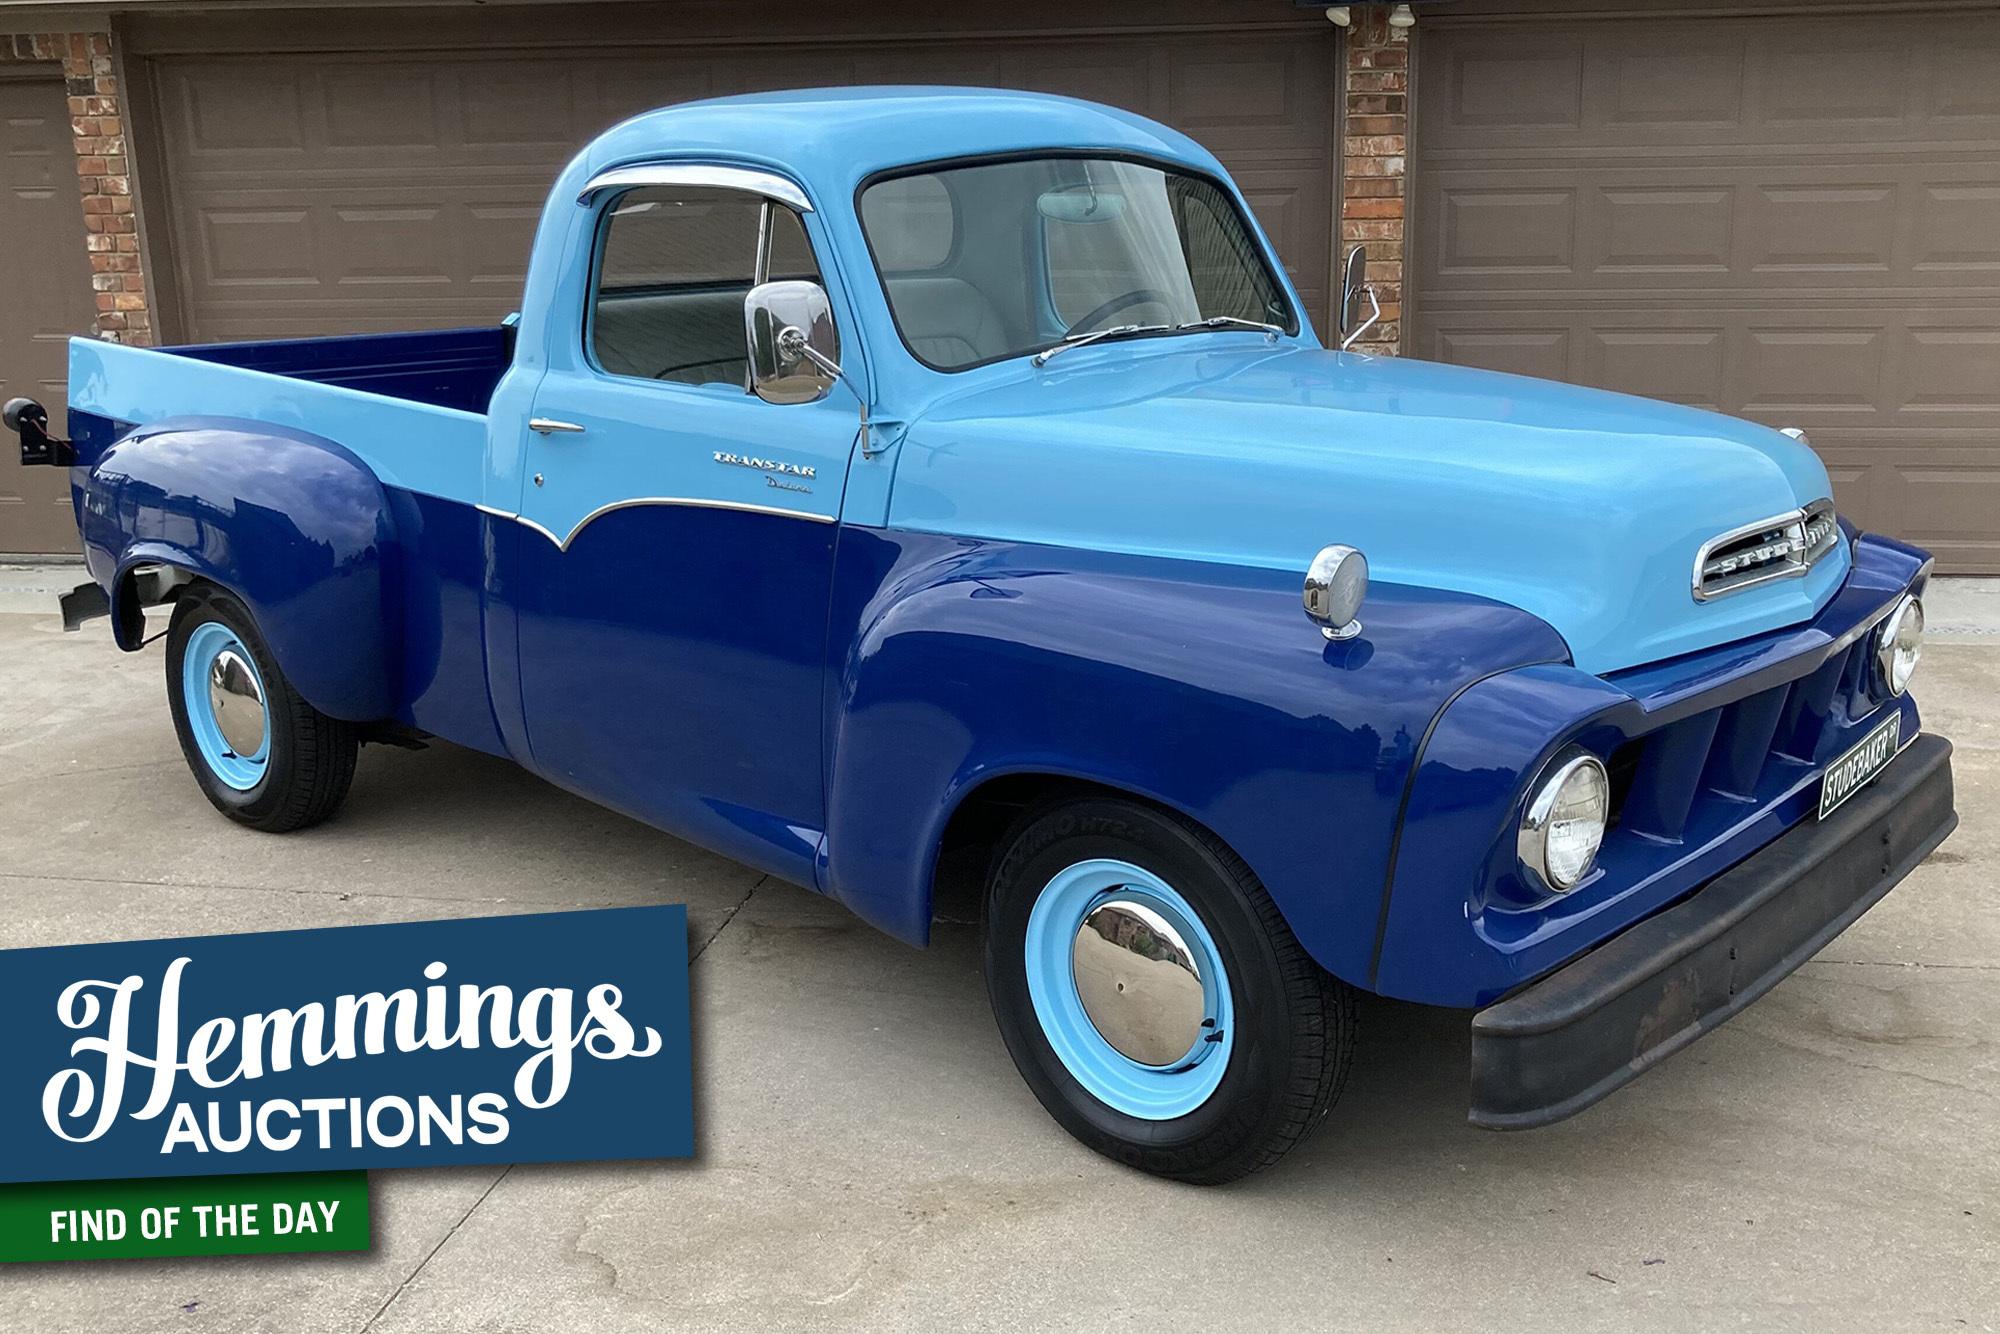 Single-family 1958 Studebaker E5 pickup retains most of its original parts after restoration